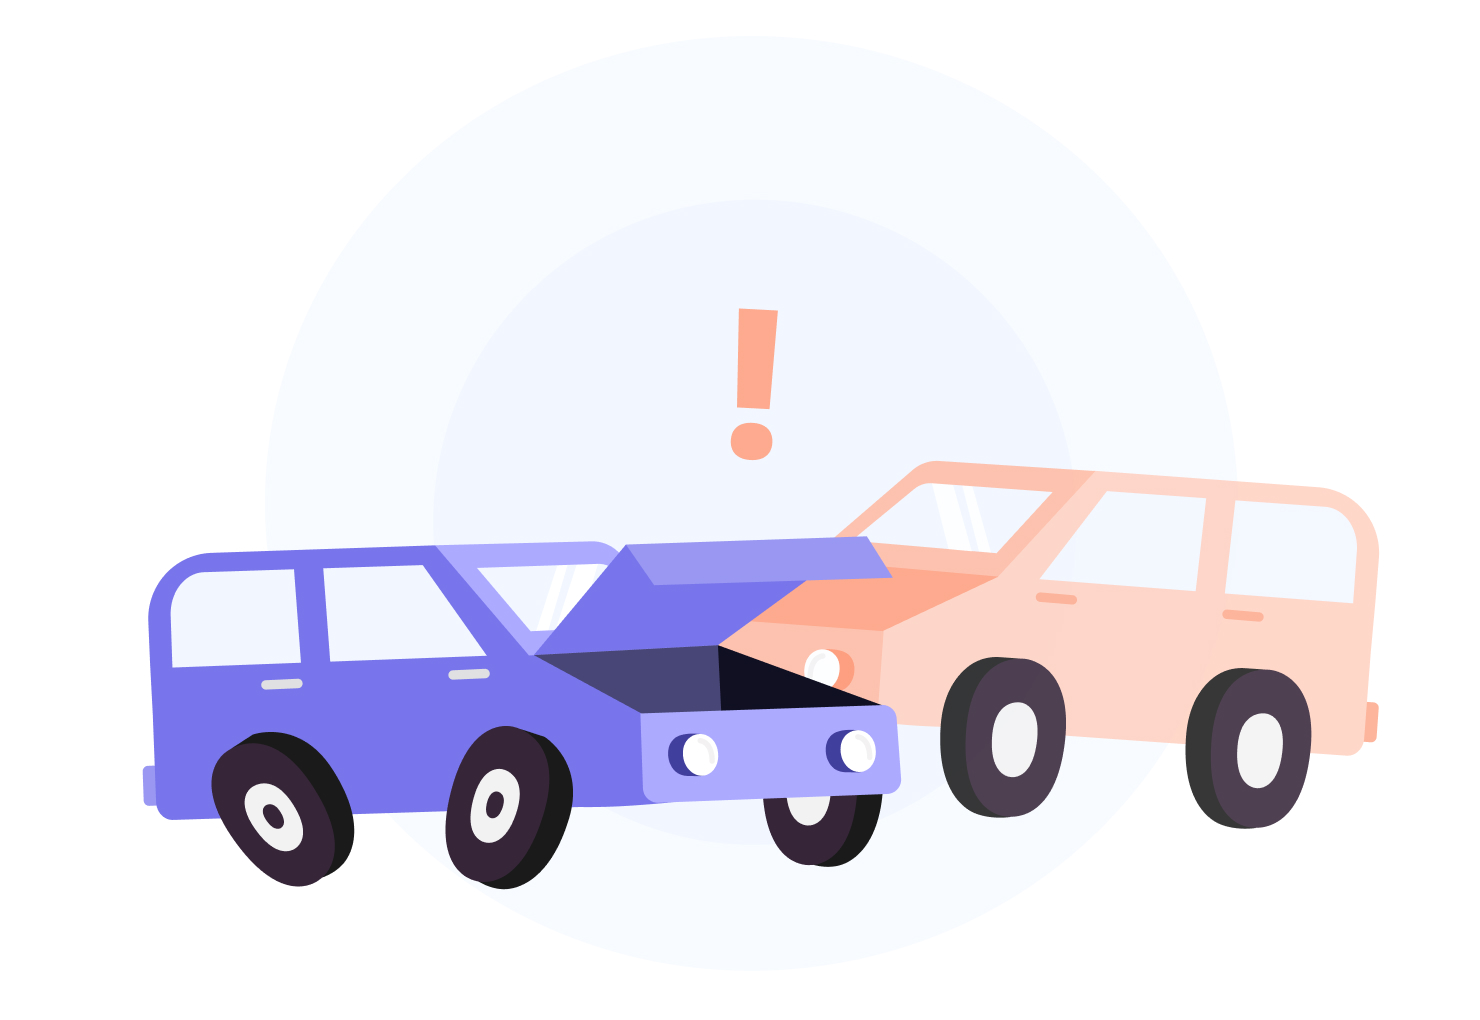 Illustrated image of two cars colliding